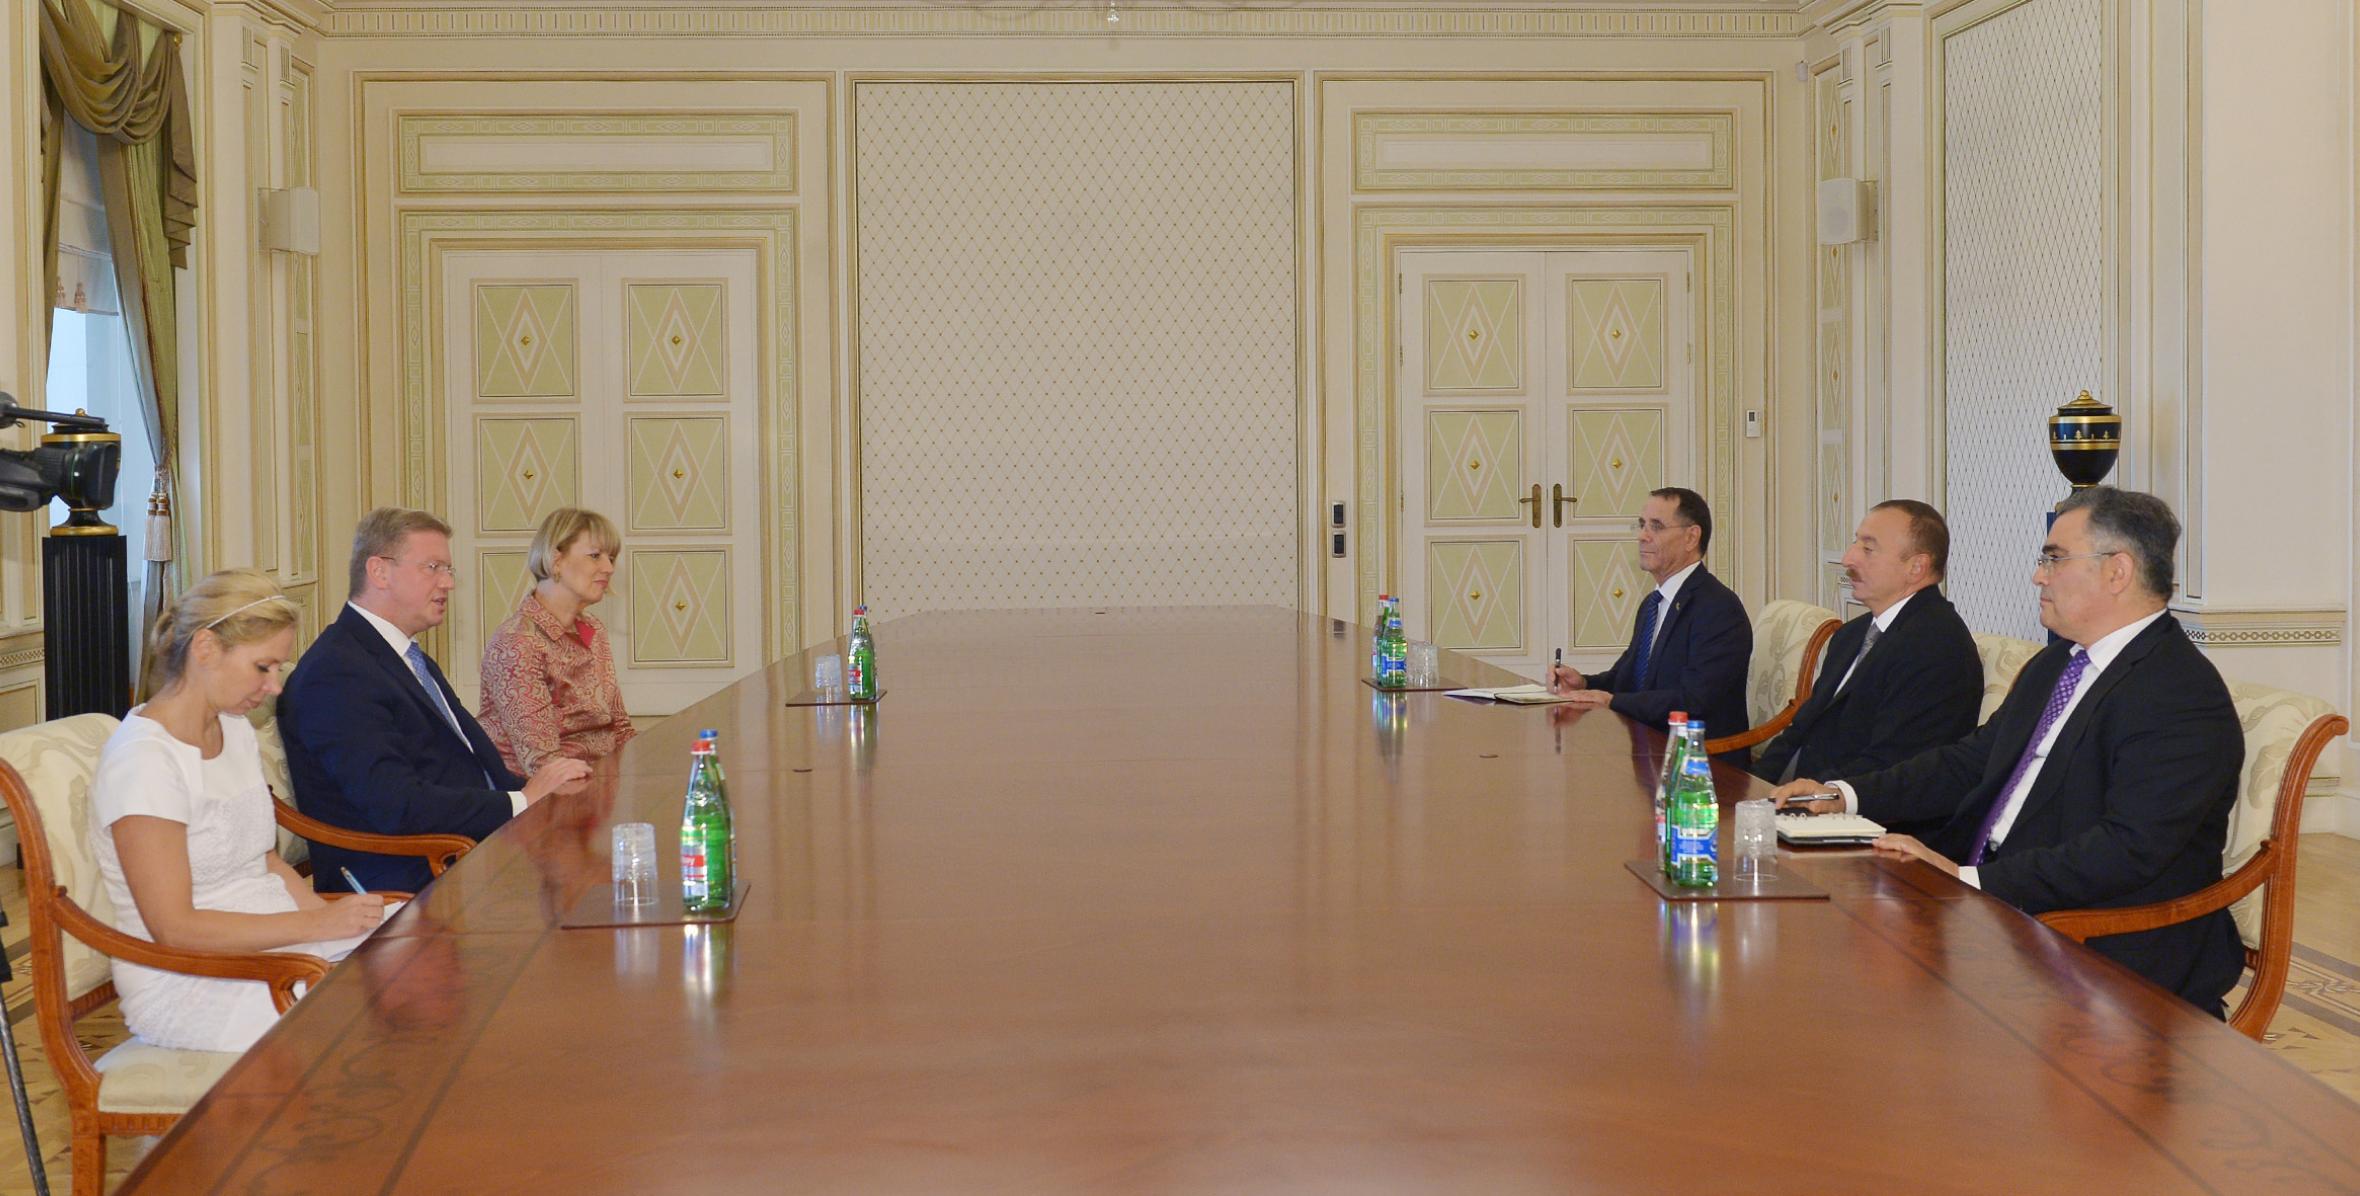 Ilham Aliyev received a delegation led by EU Commissioner for Enlargement and European Neighbourhood Policy Stefan Fule